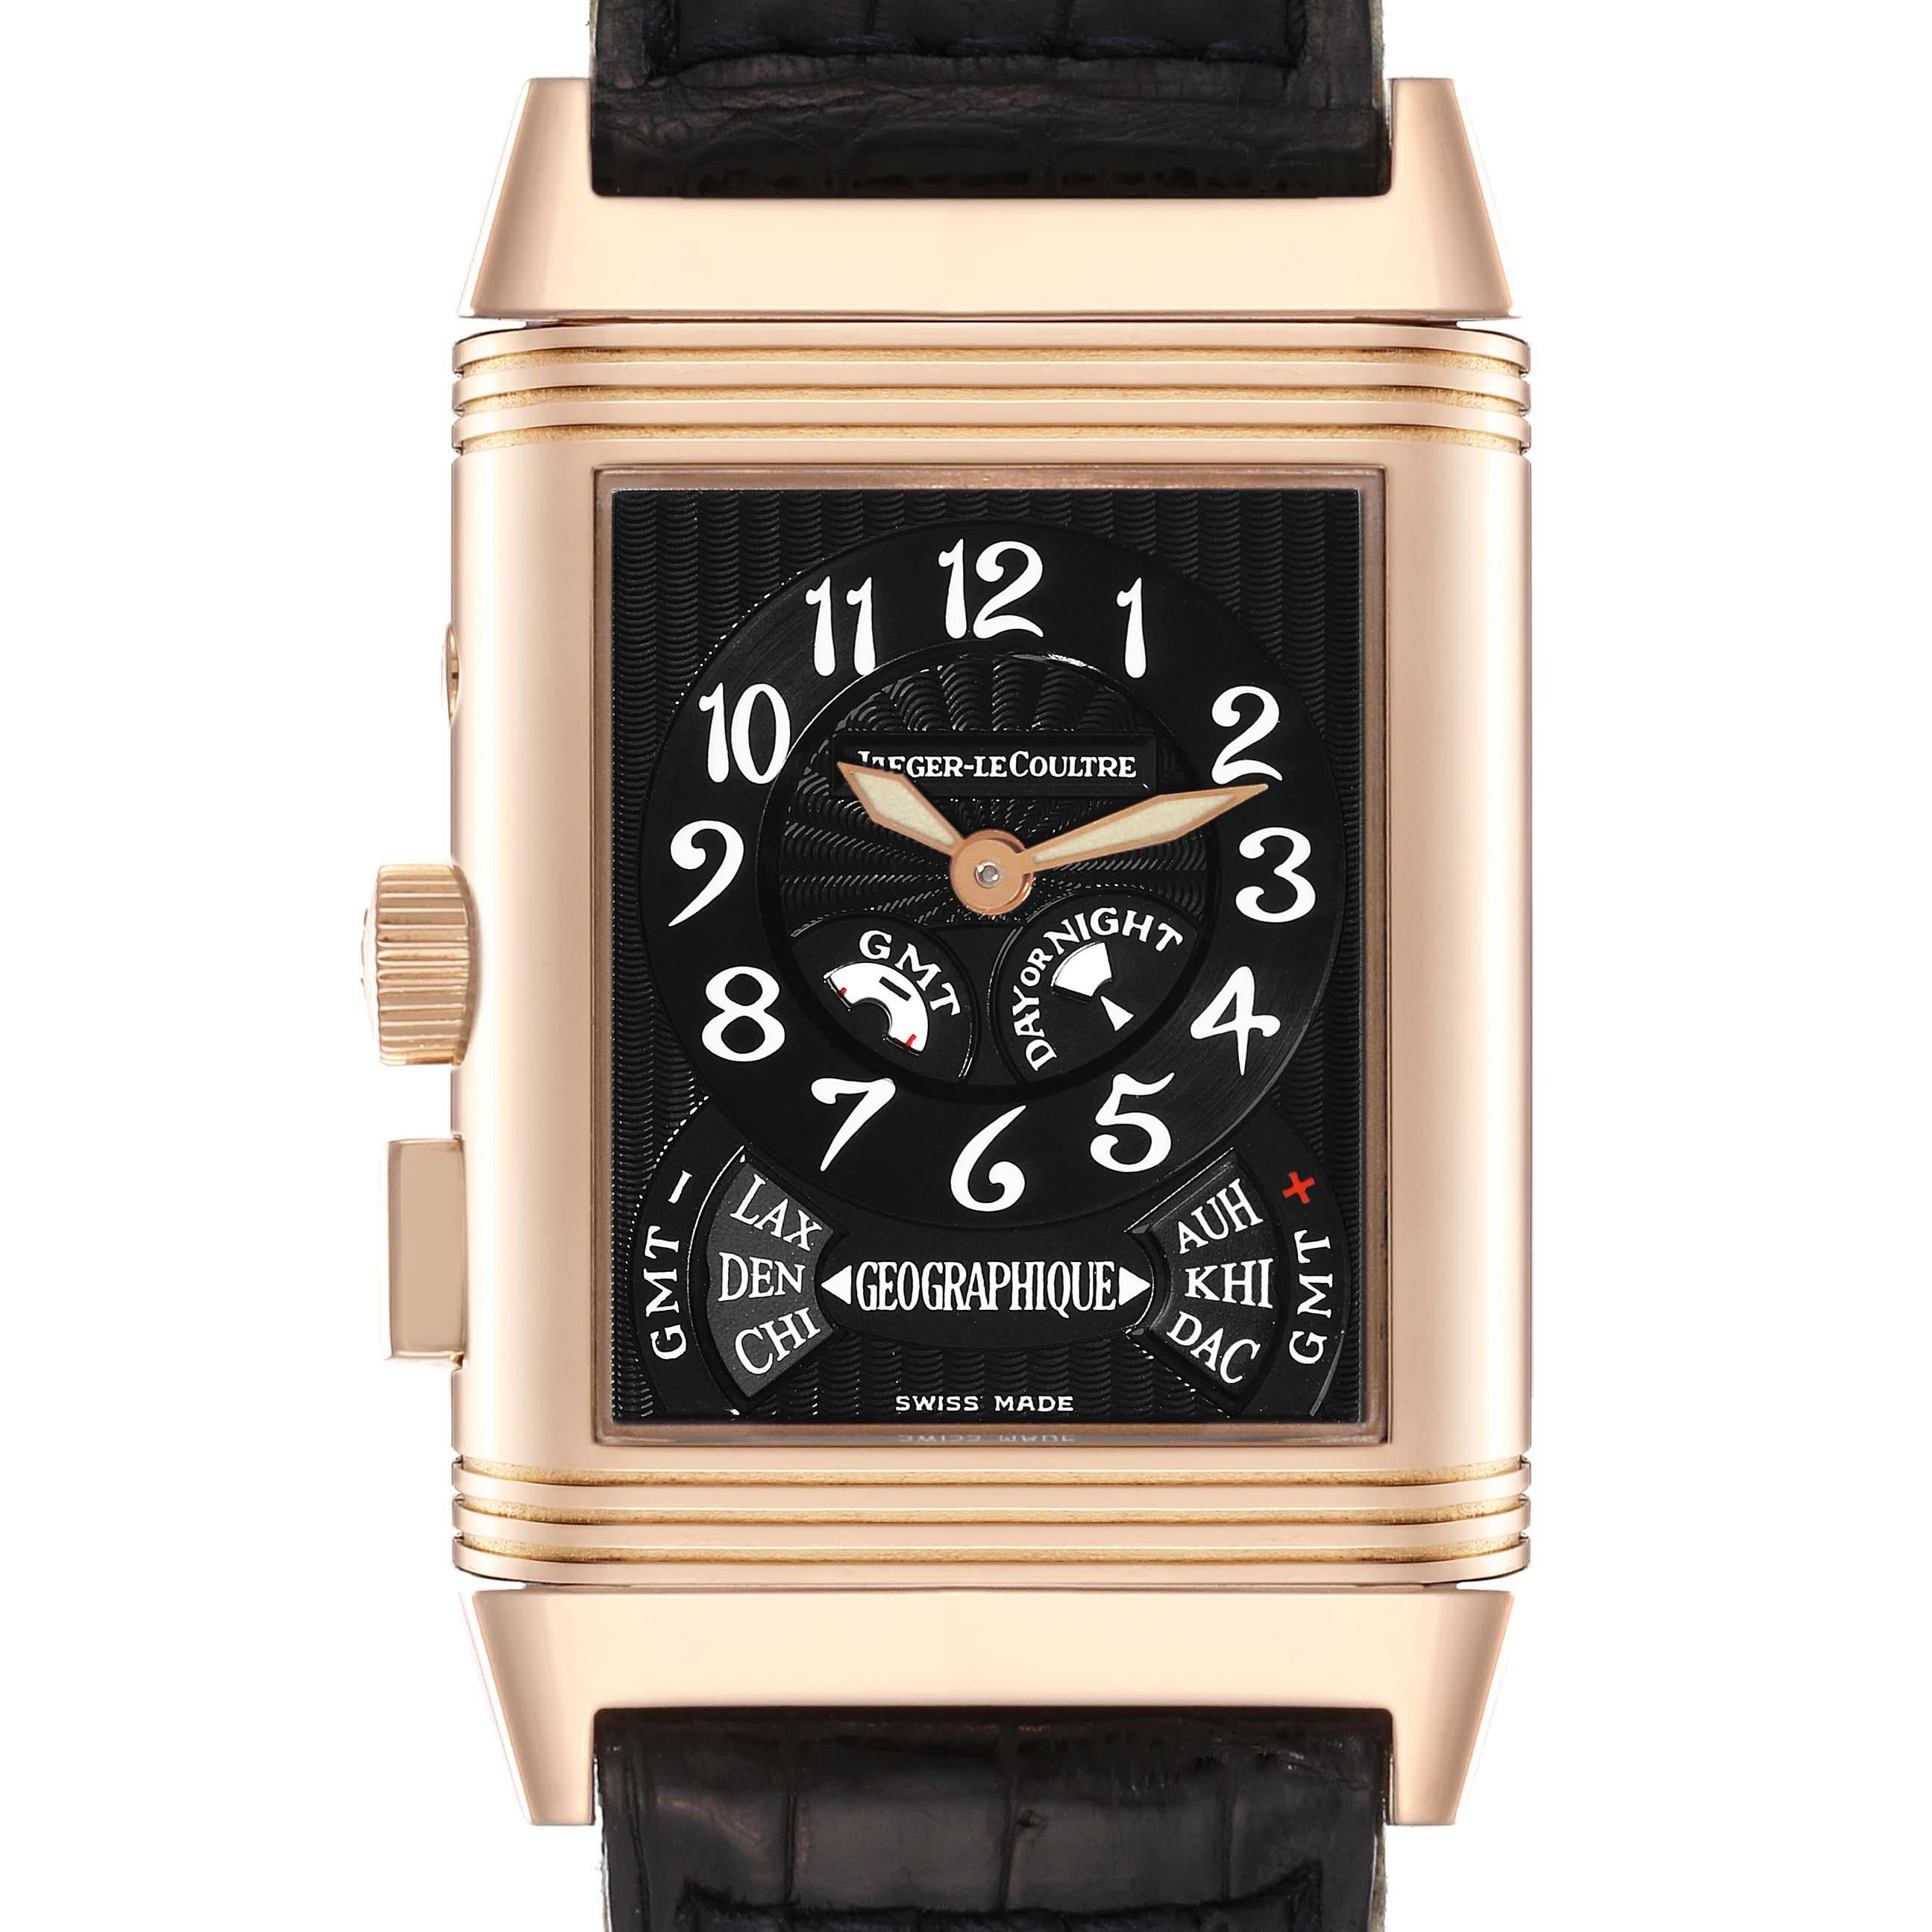 Jaeger LeCoultre Reverso Geographique LE Rose Gold Watch 270.2.582B Box Papers. Manual winding movement. 18K rose gold 36.6 x 26.1 mm rectangular rotating case. Dual time jump hour button on the side of the case. 18K rose gold ribbed bezel. Scratch